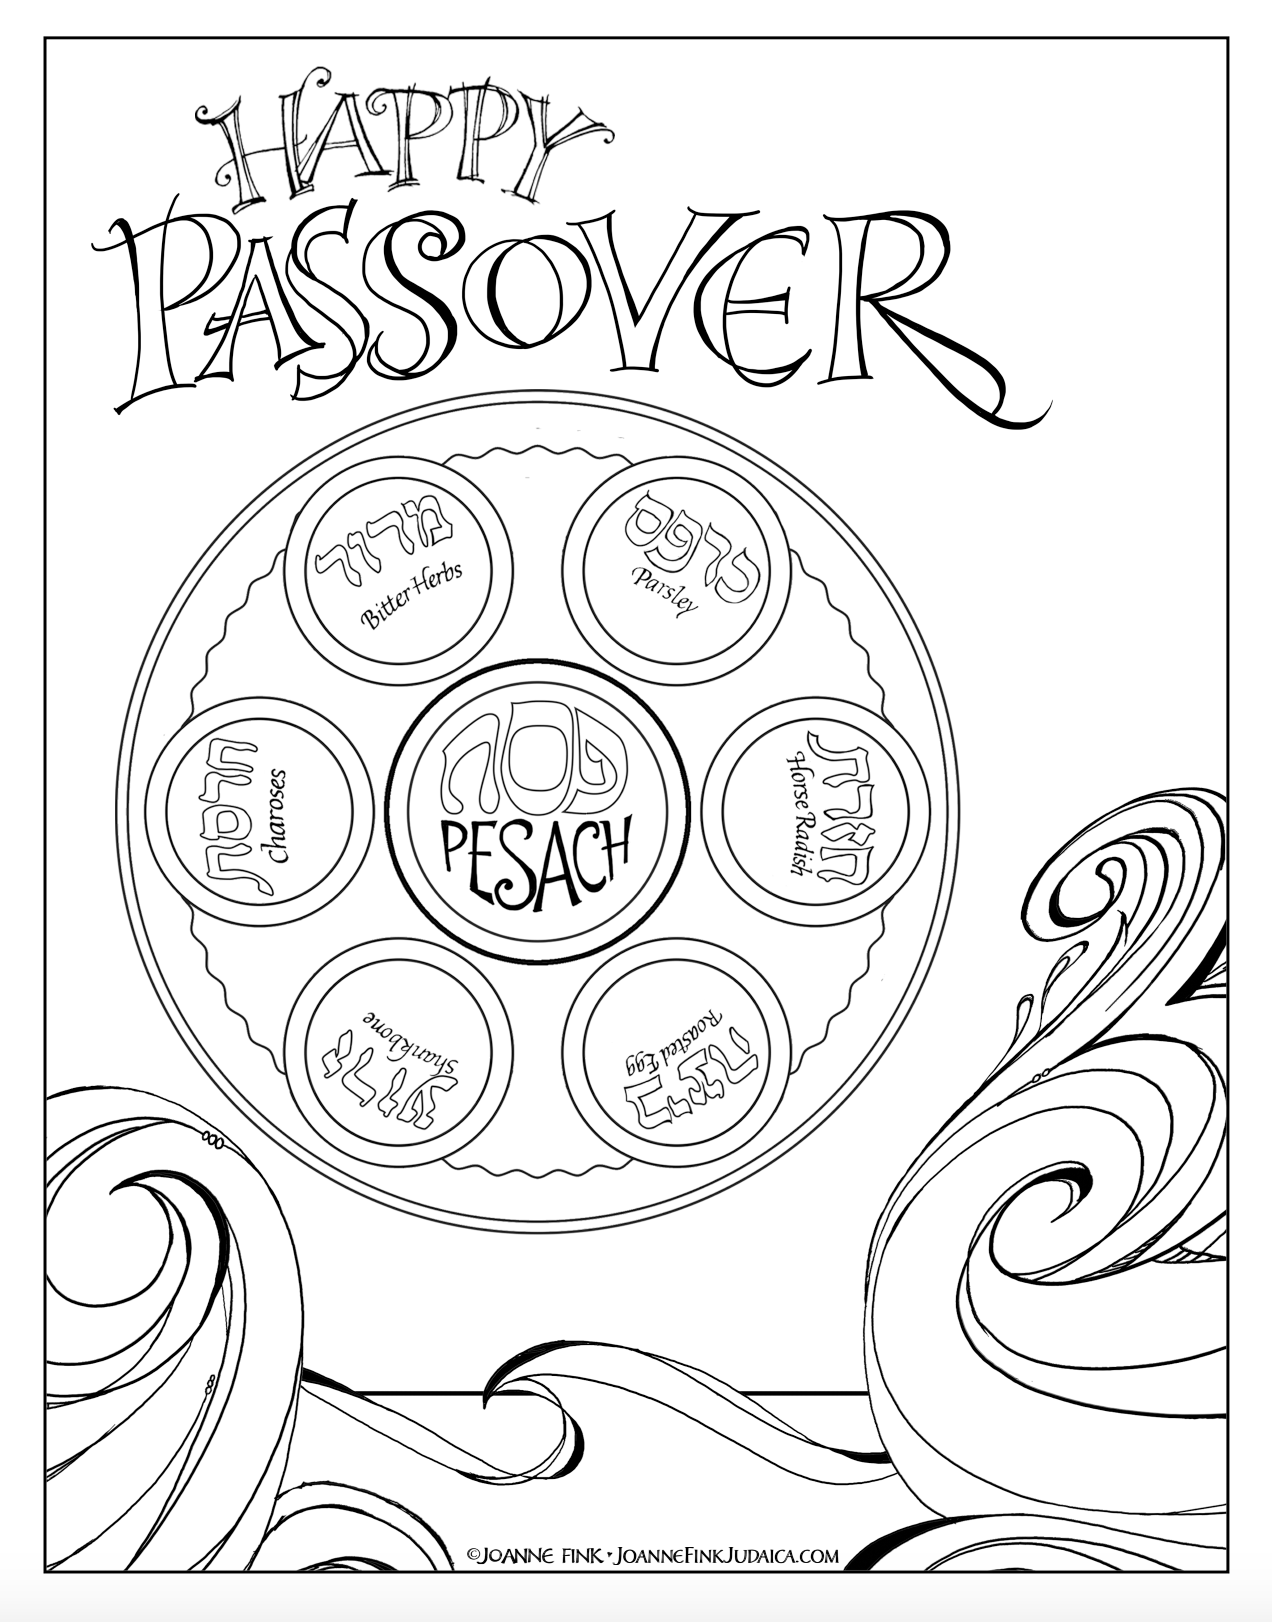 passover-coloring-pages-coloring-pages